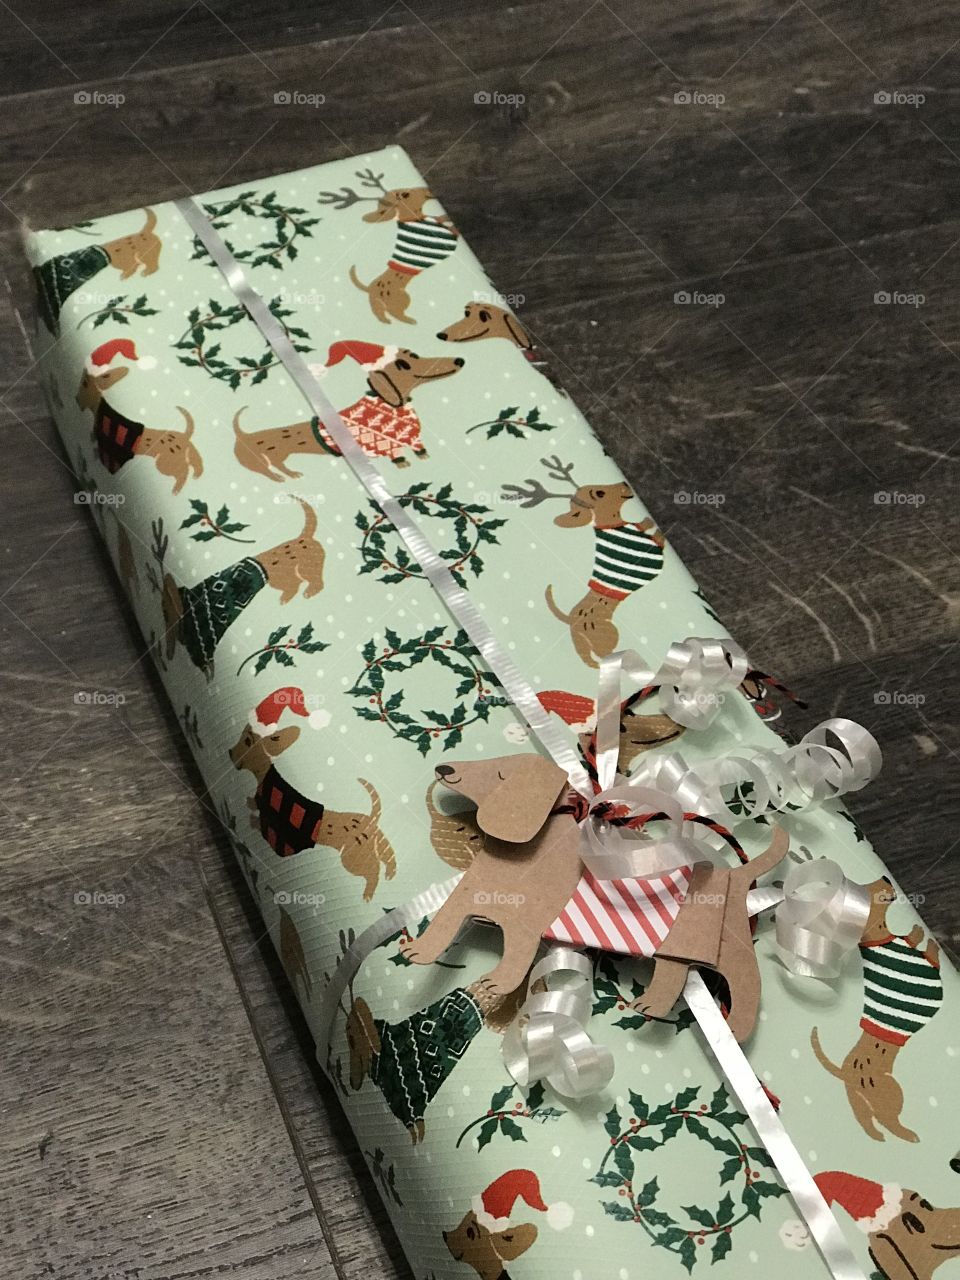 Dachshund wrapped gift